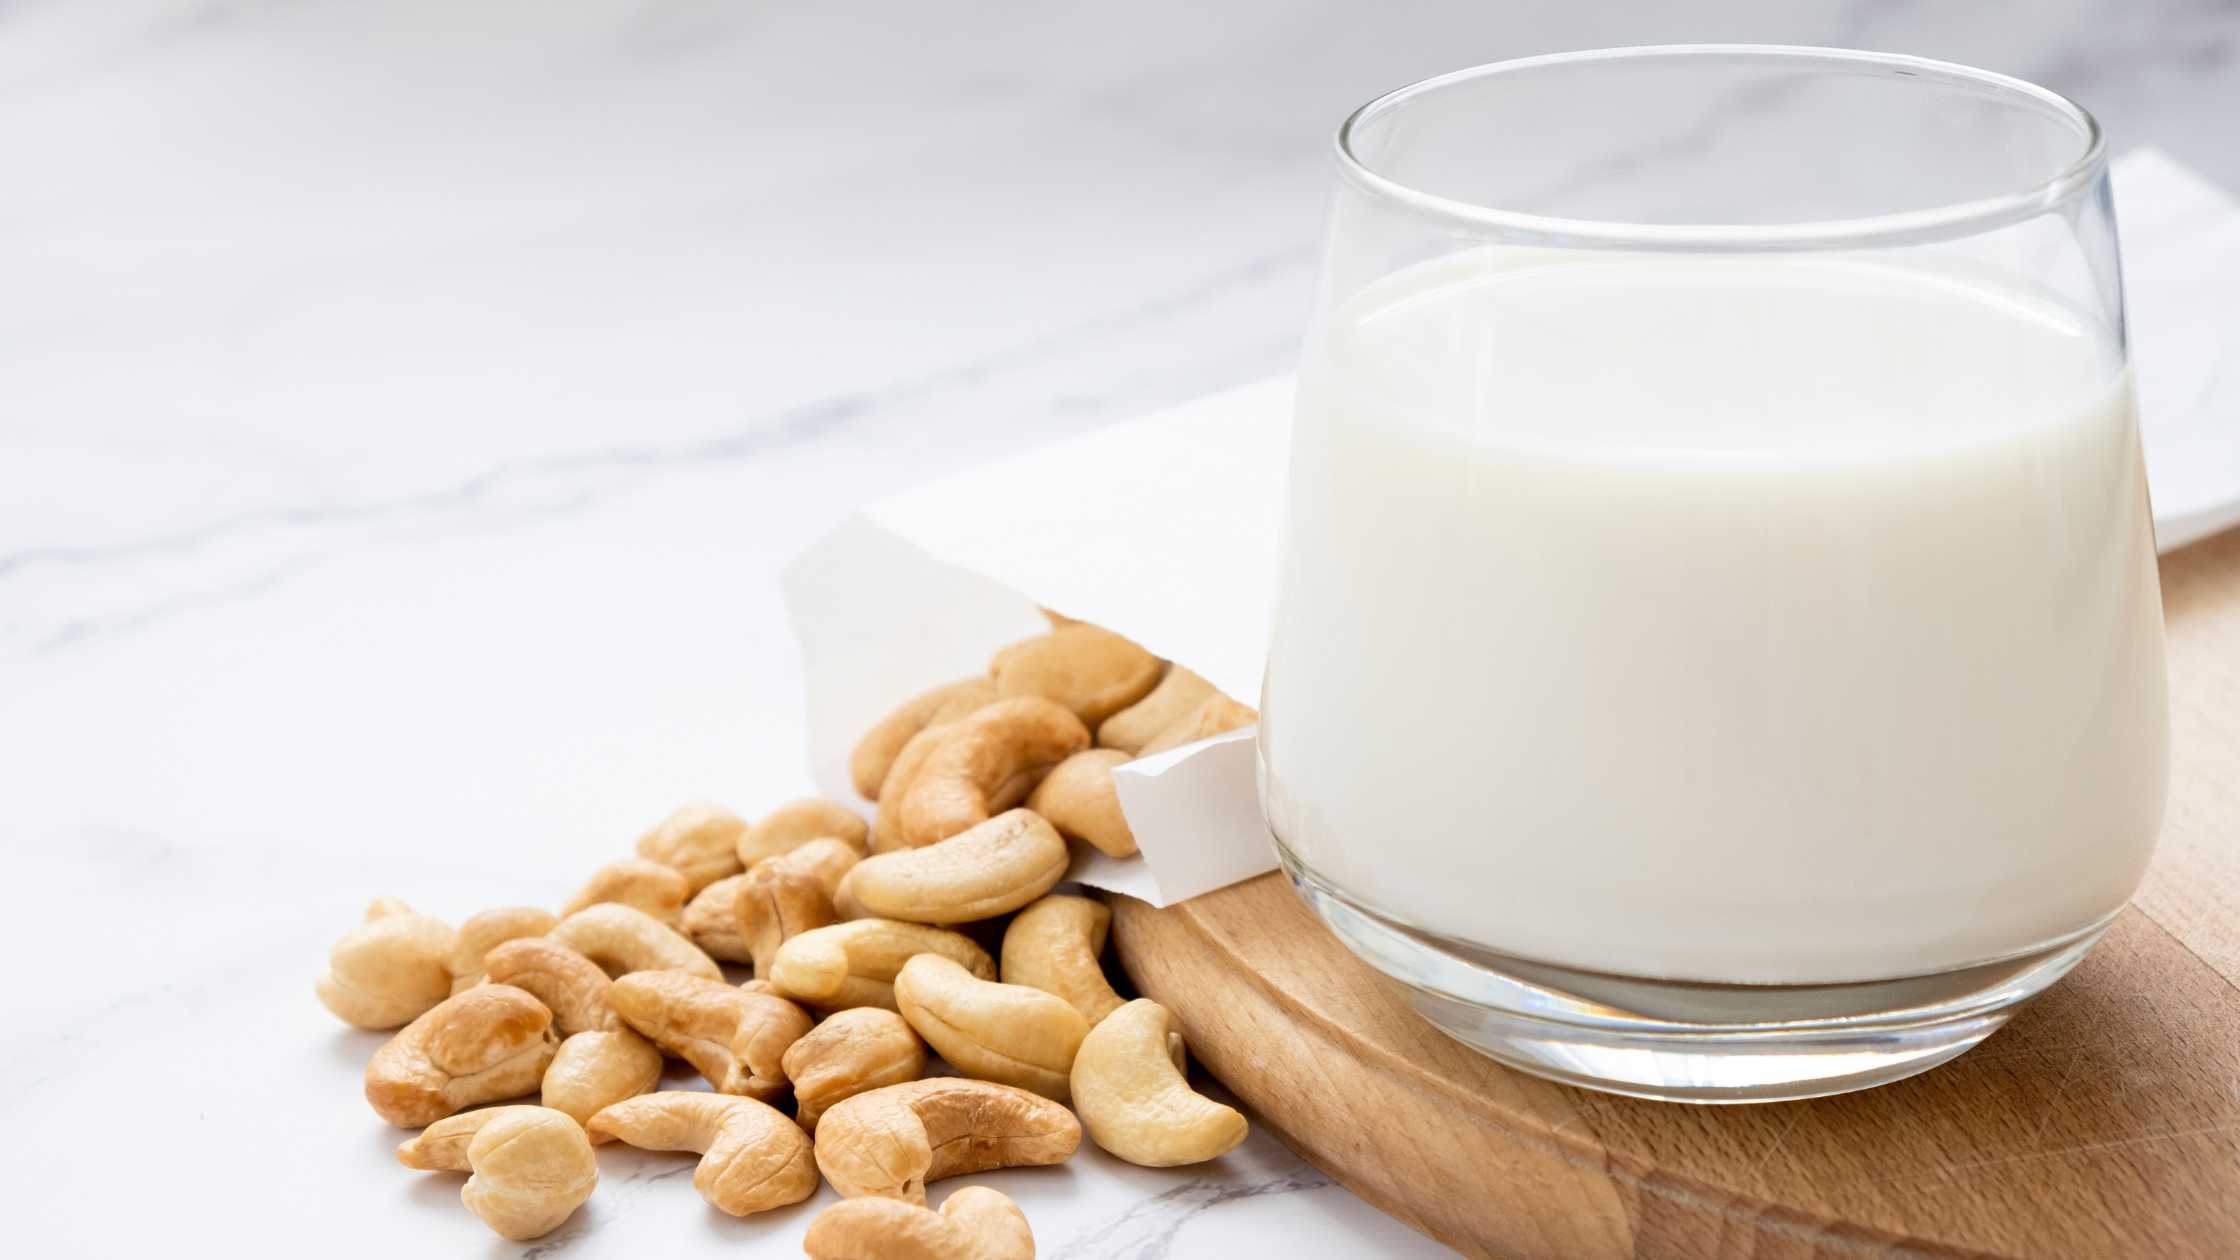 Plant-based-milk-with-heap-of-cashew-nuts-on-wooden-board